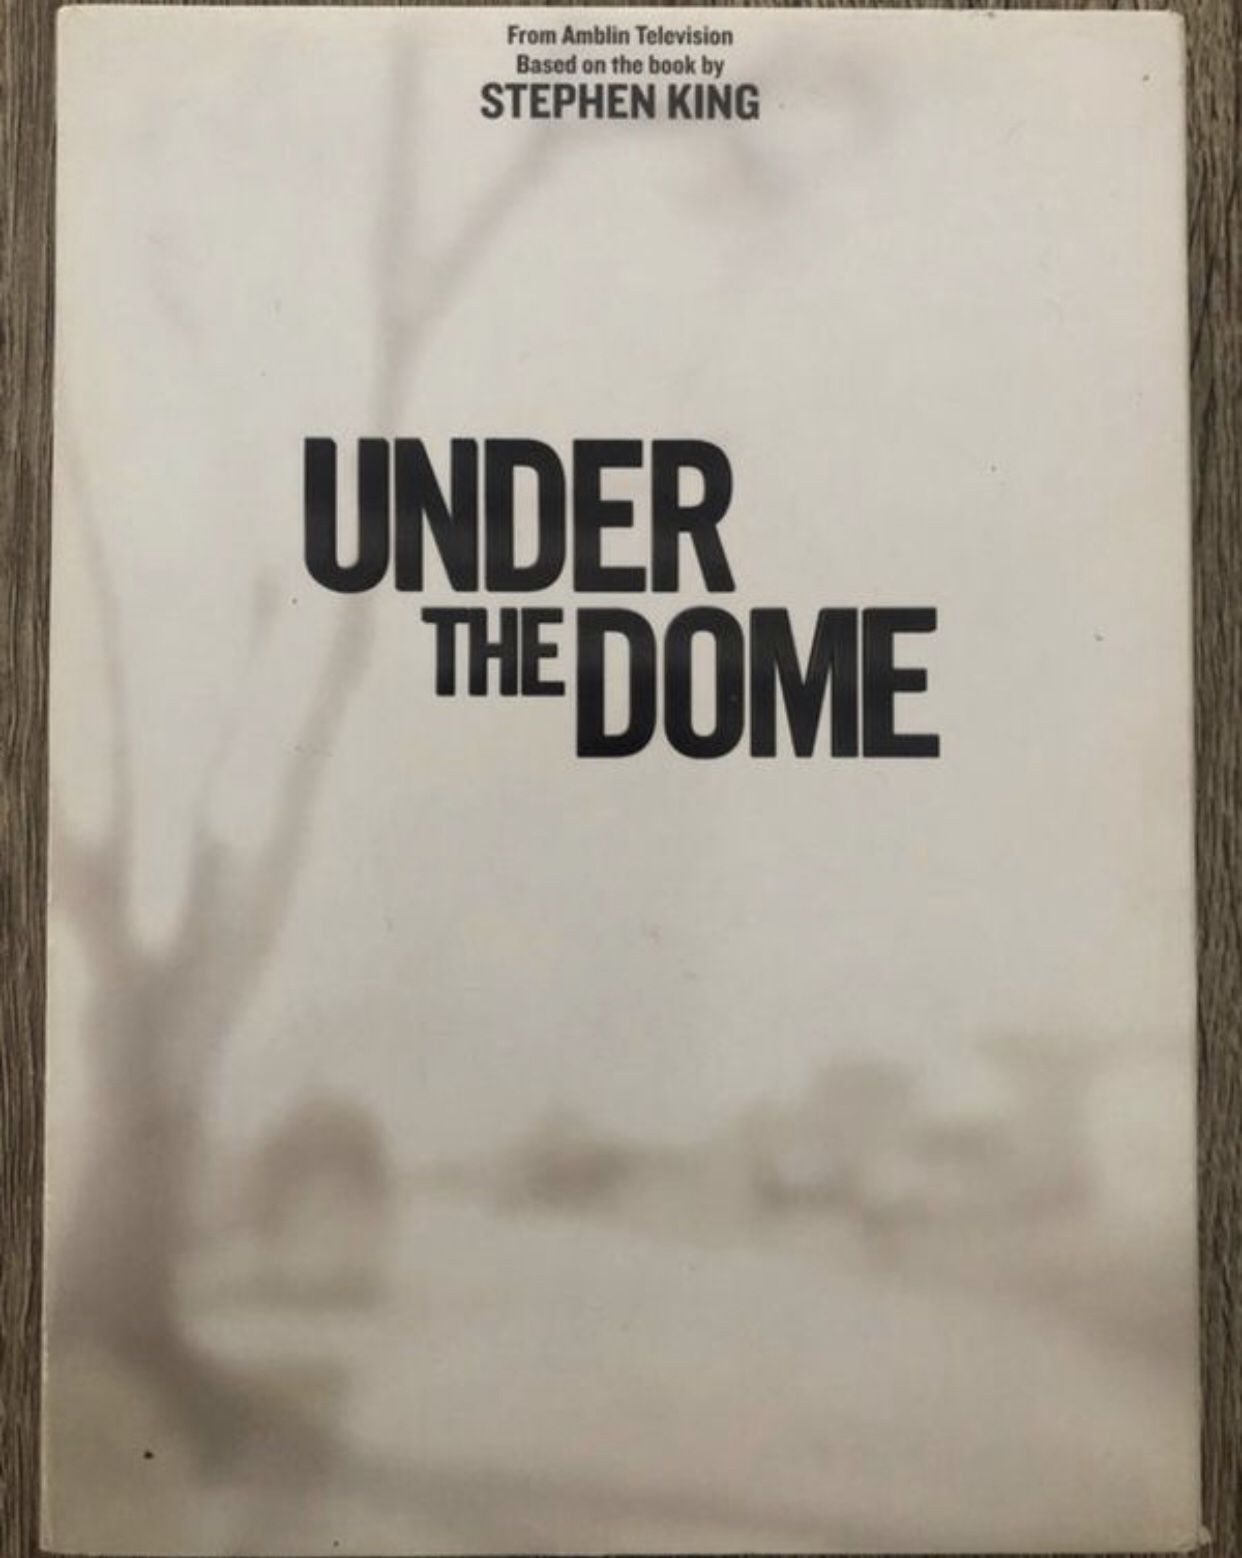 UNDER THE DOME Season 1 CBS Series 2013 DVD 4-Disc Set With Special Features